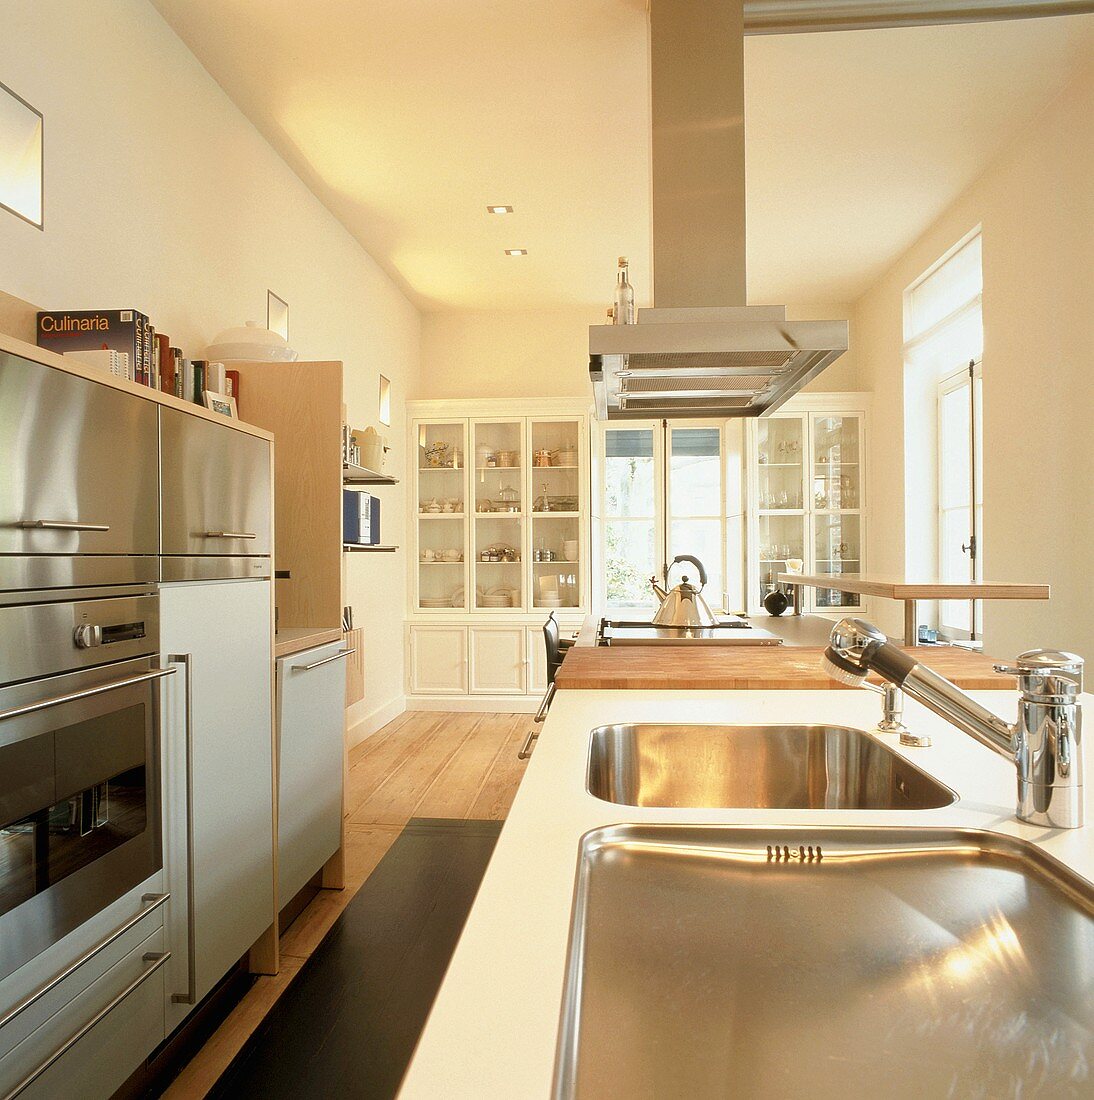 Well-equipped, modern kitchen with glass-fronted cabinets in background and appliances with stainless steel fronts